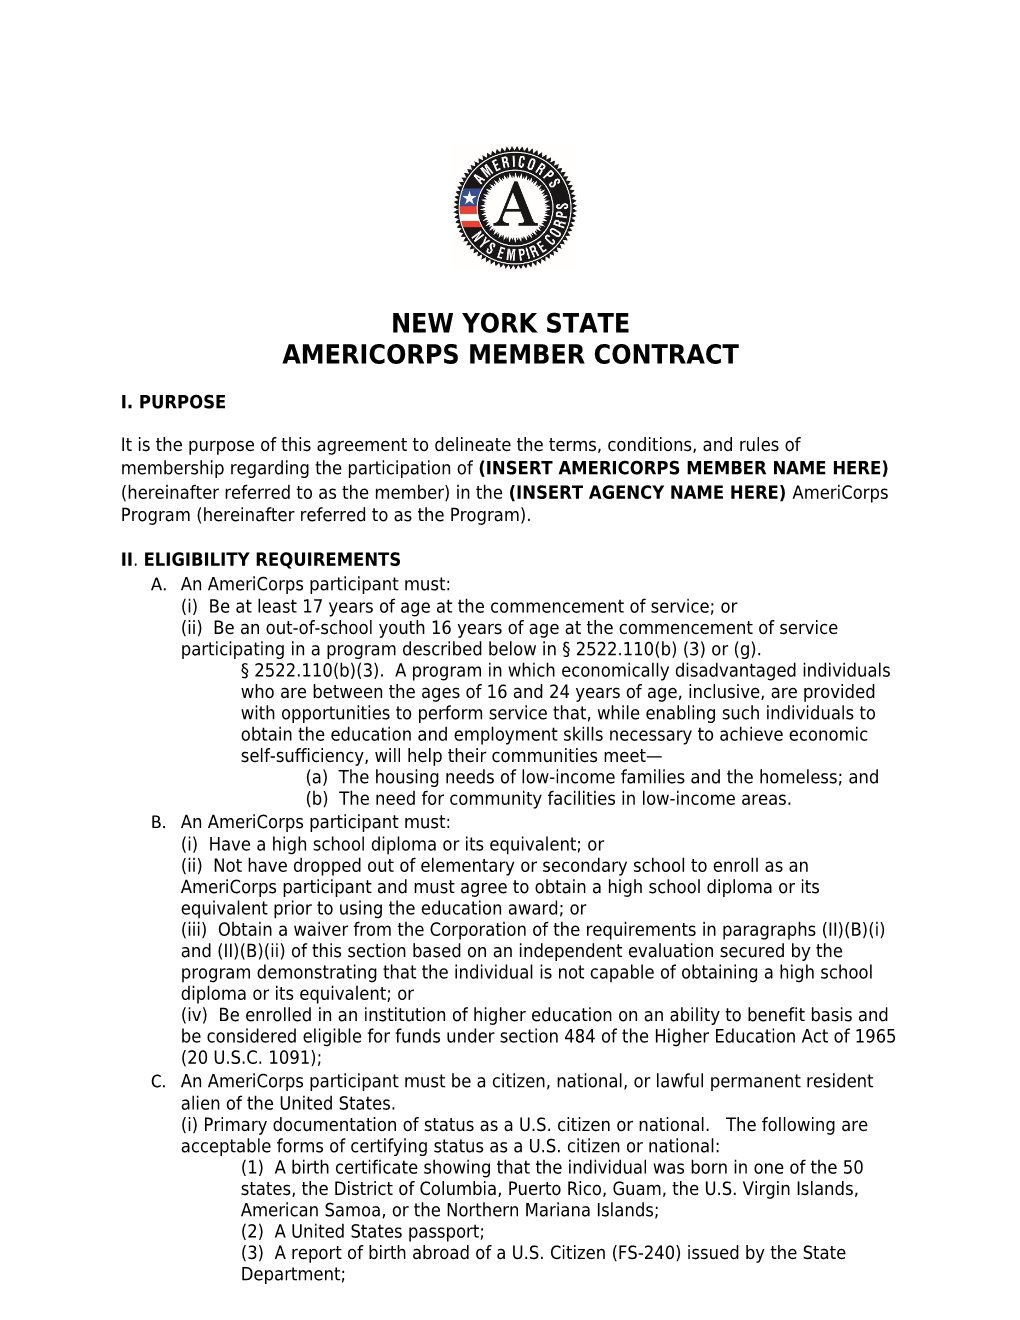 Americorps Member Contract